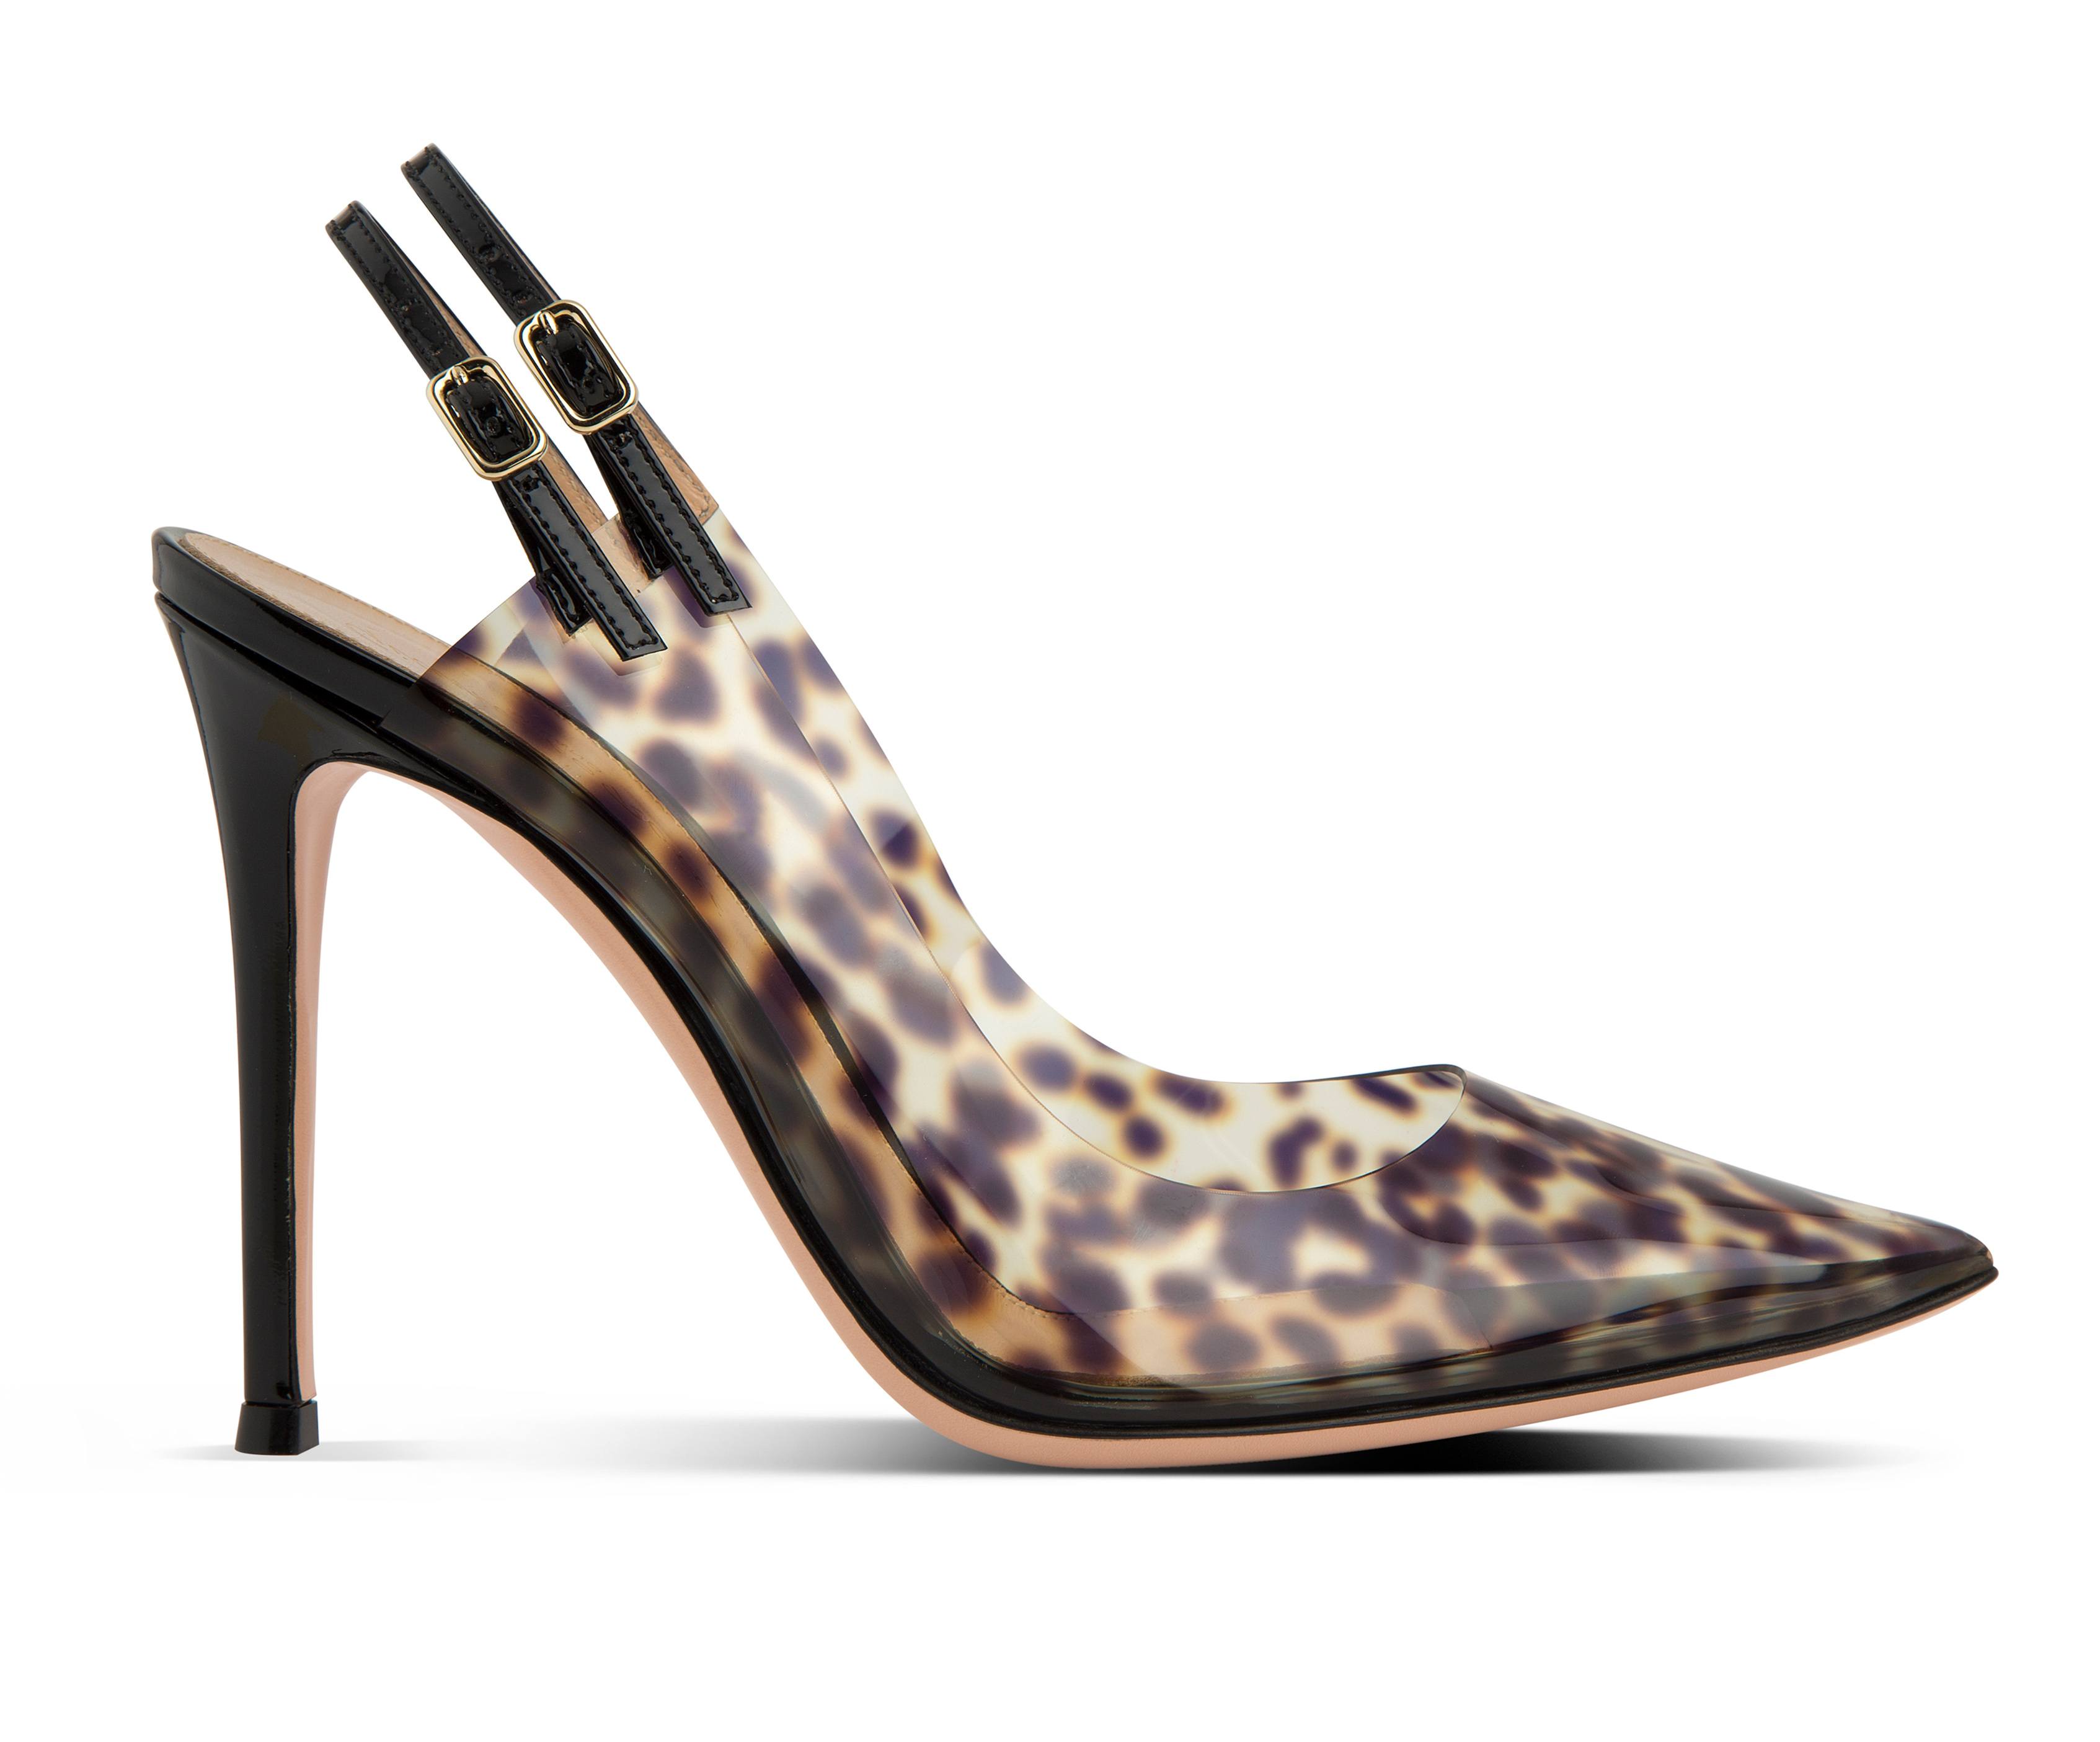 The Kylie pump combines plexi and animal print. Embellished with leopard spots, the pvc pump has two buckled slingback straps and a black patent 105mm heel.